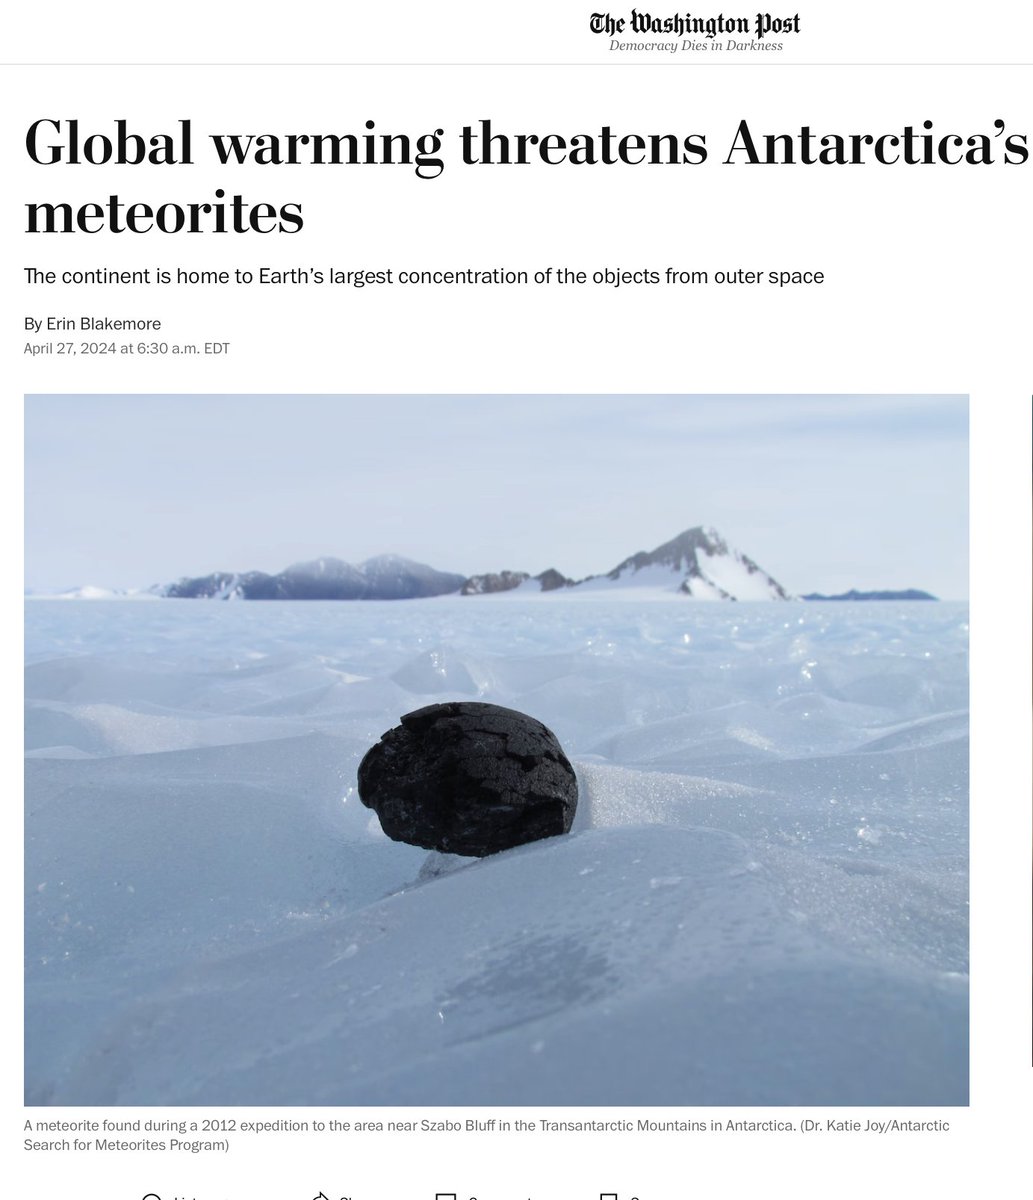 Global warming doesn't 'threaten' Antarctic meteorites as there has been no warming there in 70 years. nature.com/articles/s4161… washingtonpost.com/science/2024/0…